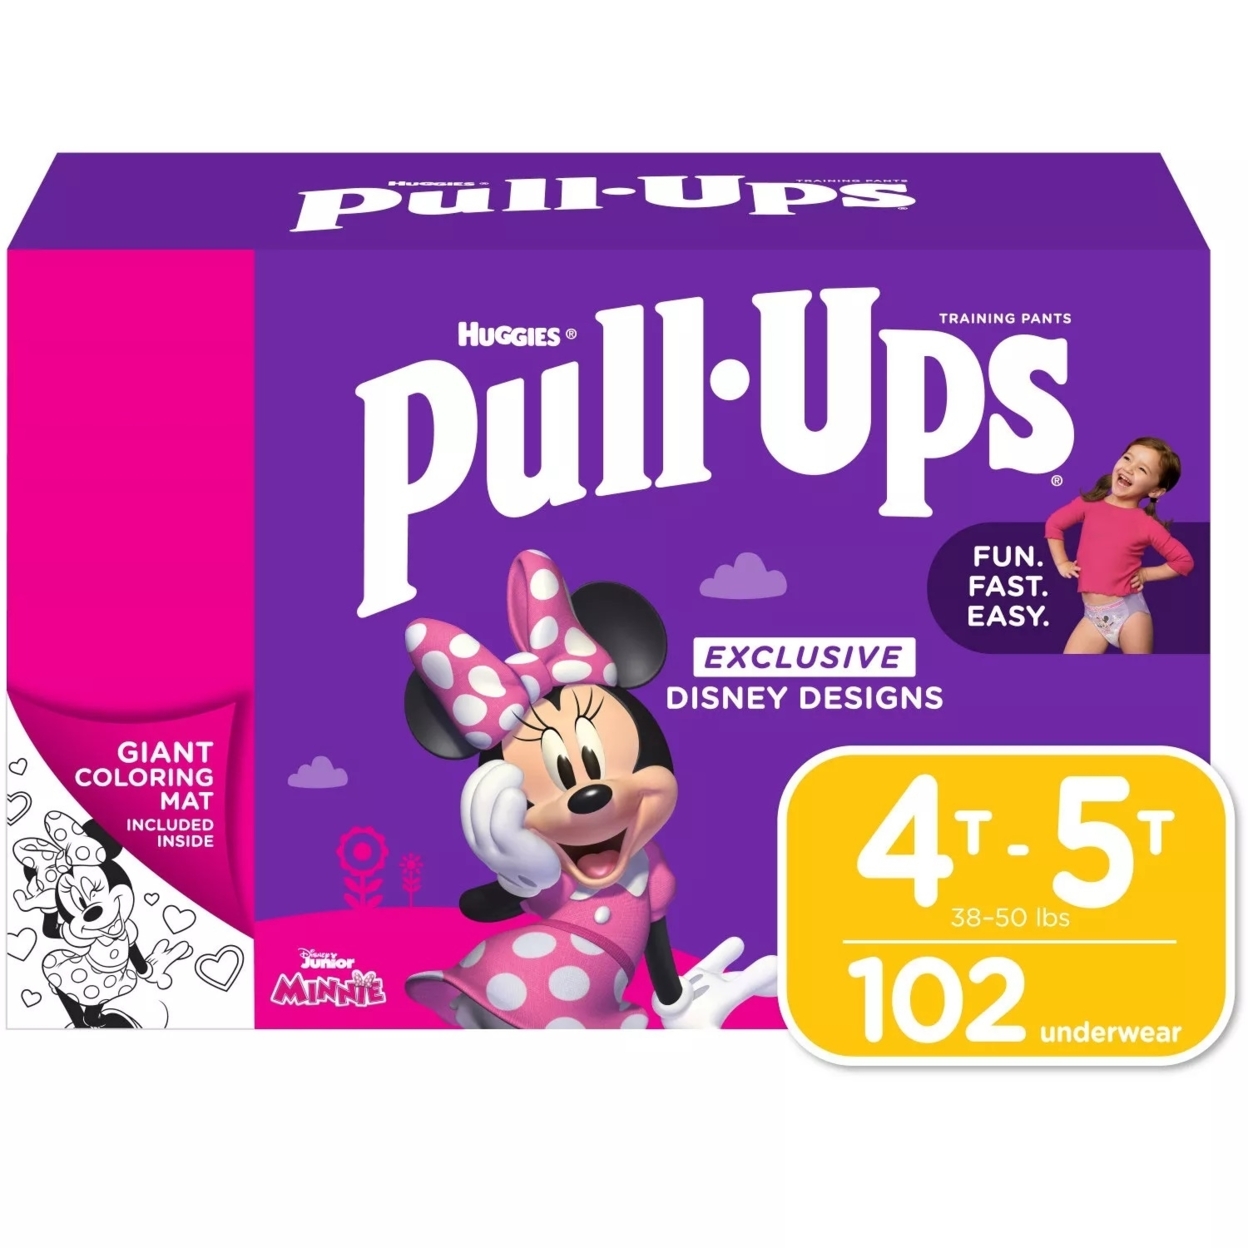 Huggies Pull-Ups Potty Training Pants For Girls, 4T-5T 35-50 Pounds (102 Count)